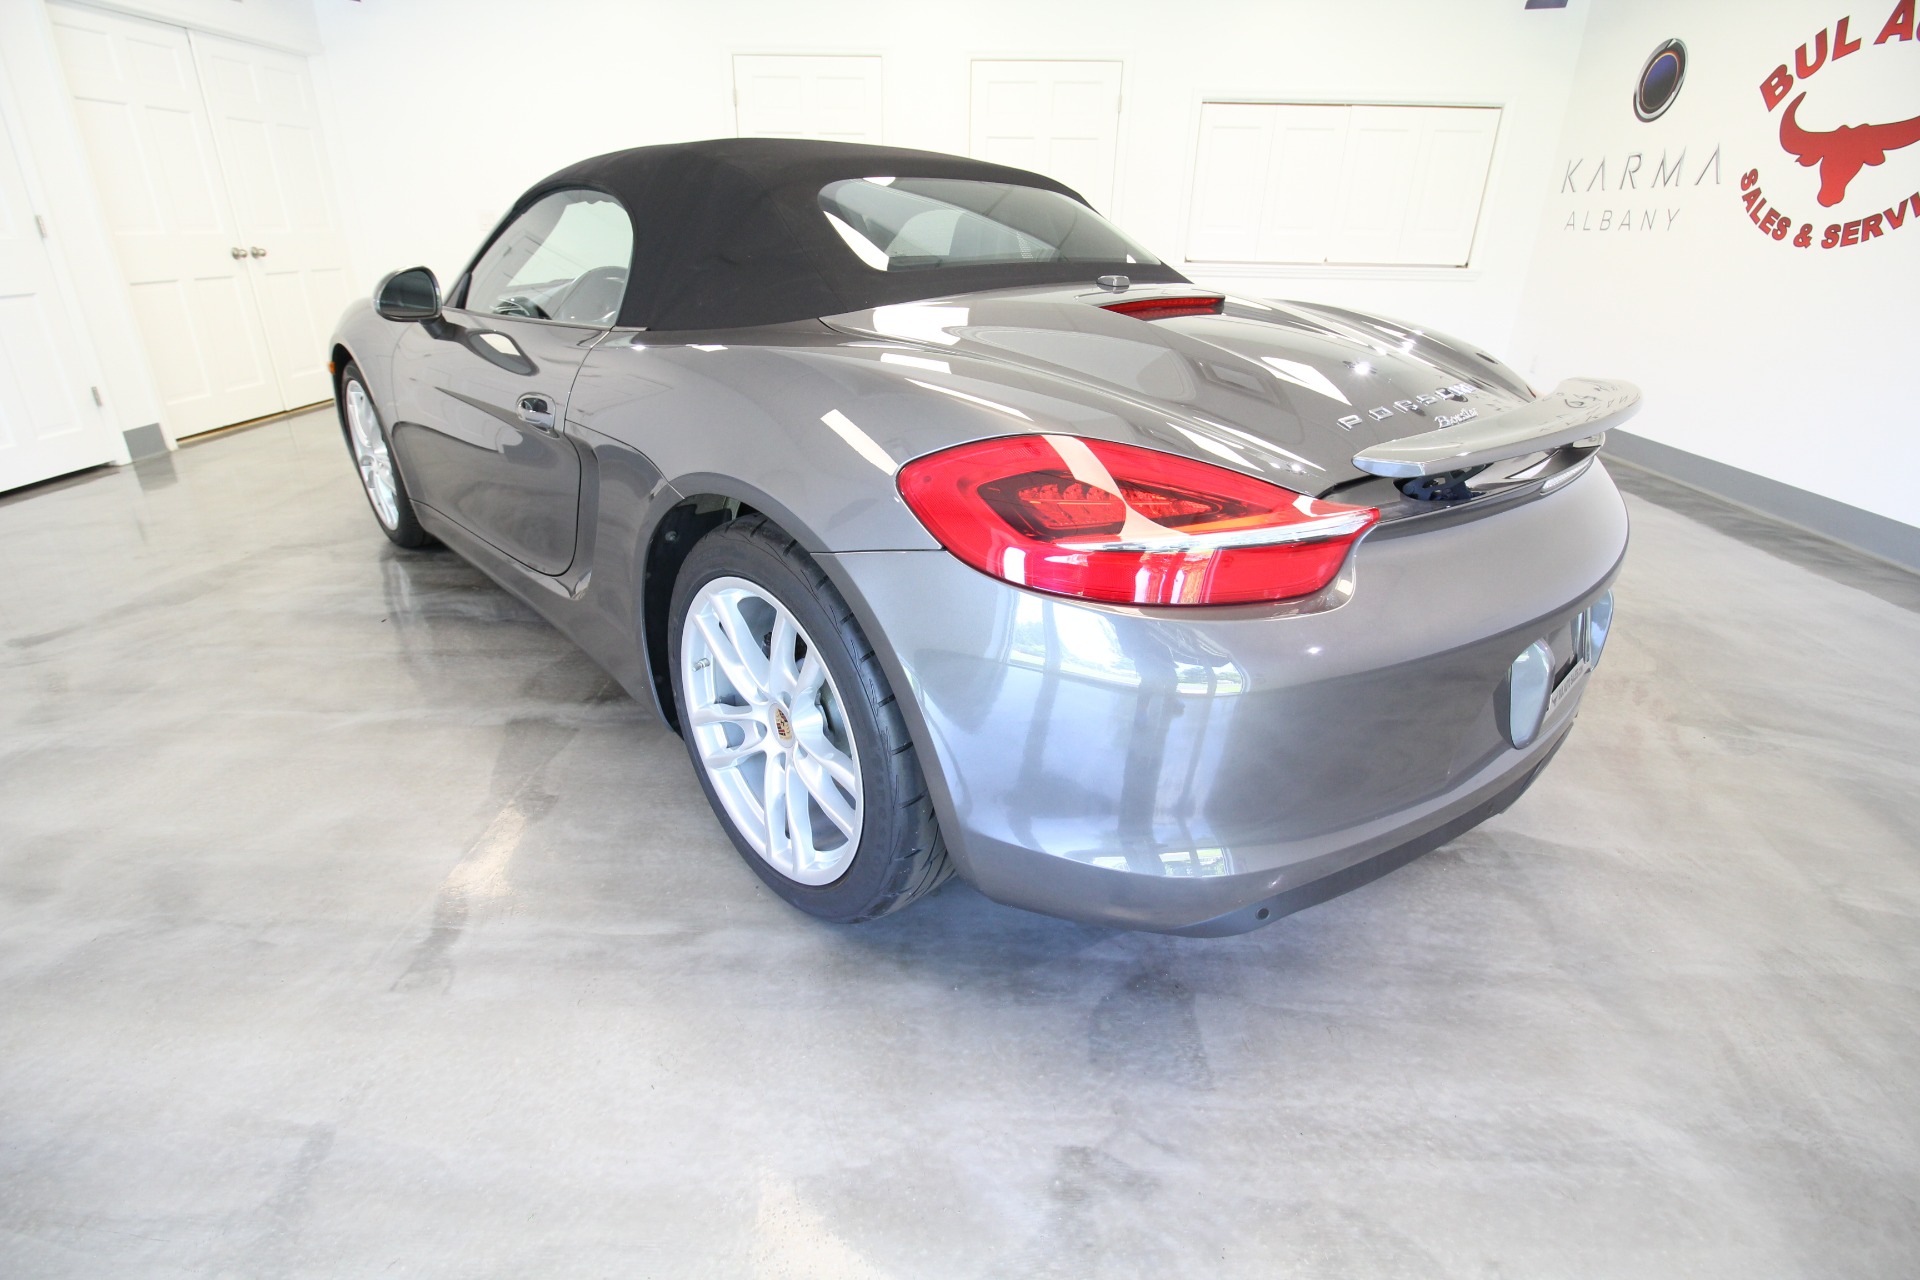 Used 2014 Agate Gray Metallic Porsche Boxster Well Equiped PDK Boxter | Albany, NY